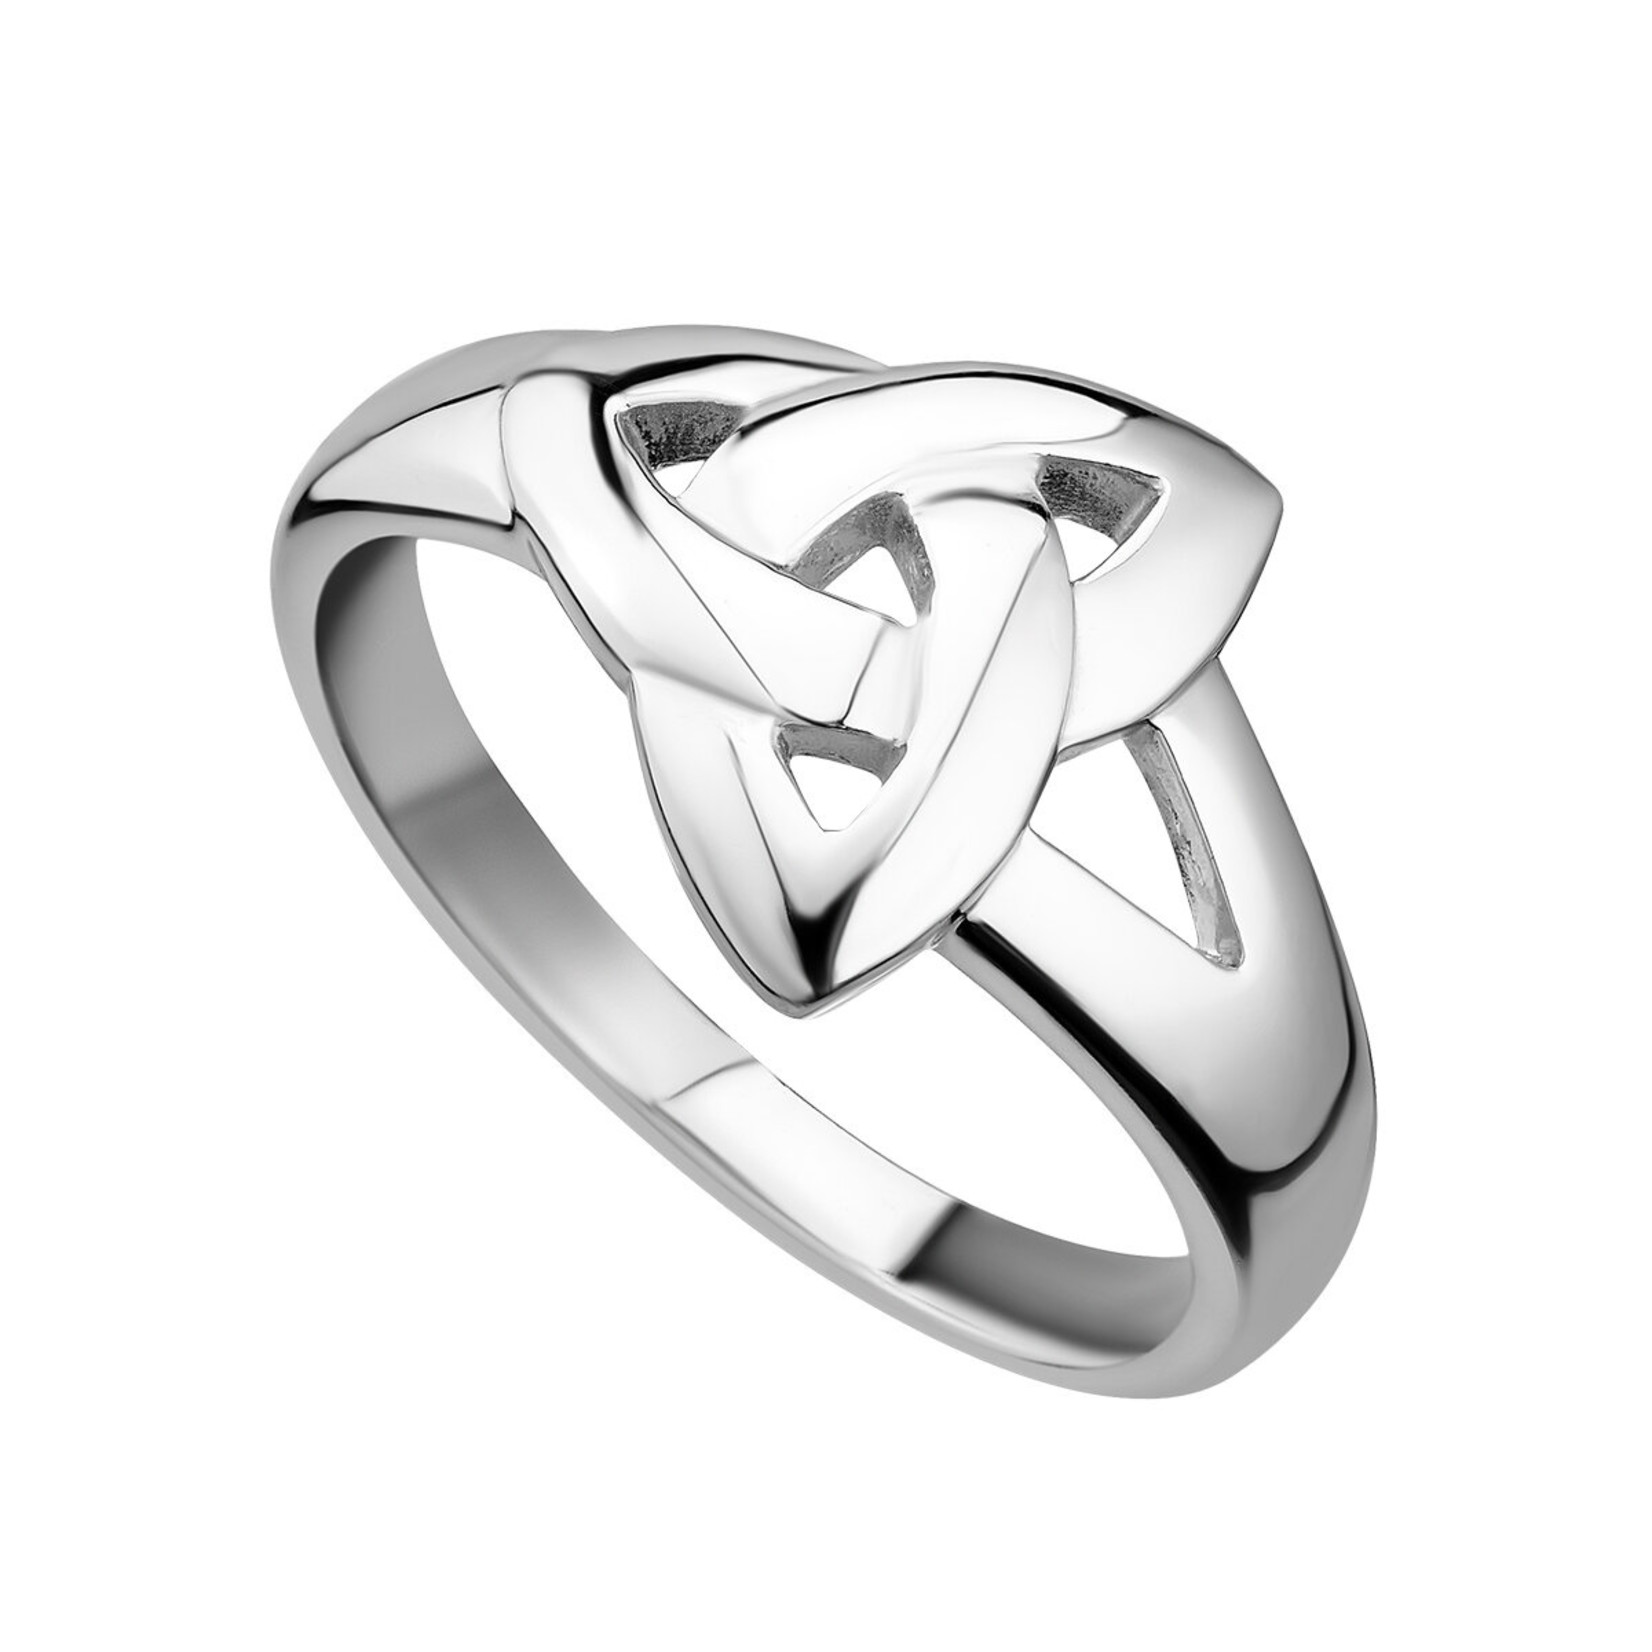 Solvar Sterling Silver Trinity Knot Ring - Large